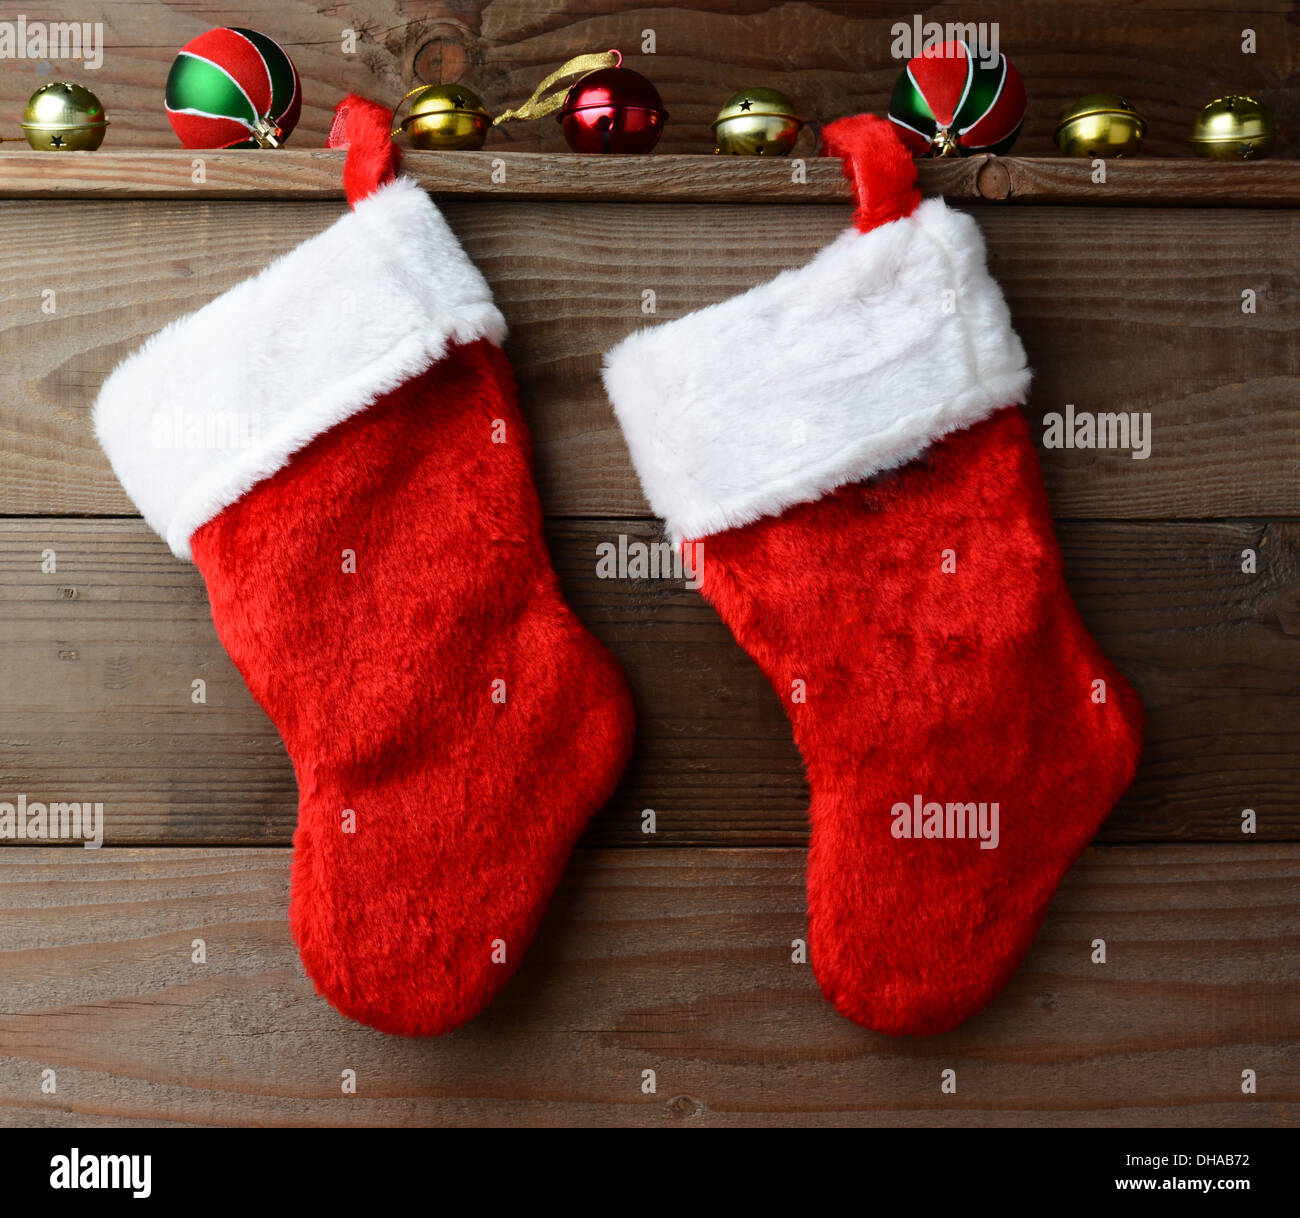 Two Christmas stockings hung on a rustic wooden wall with sliegh bells and ornaments. Stock Photo